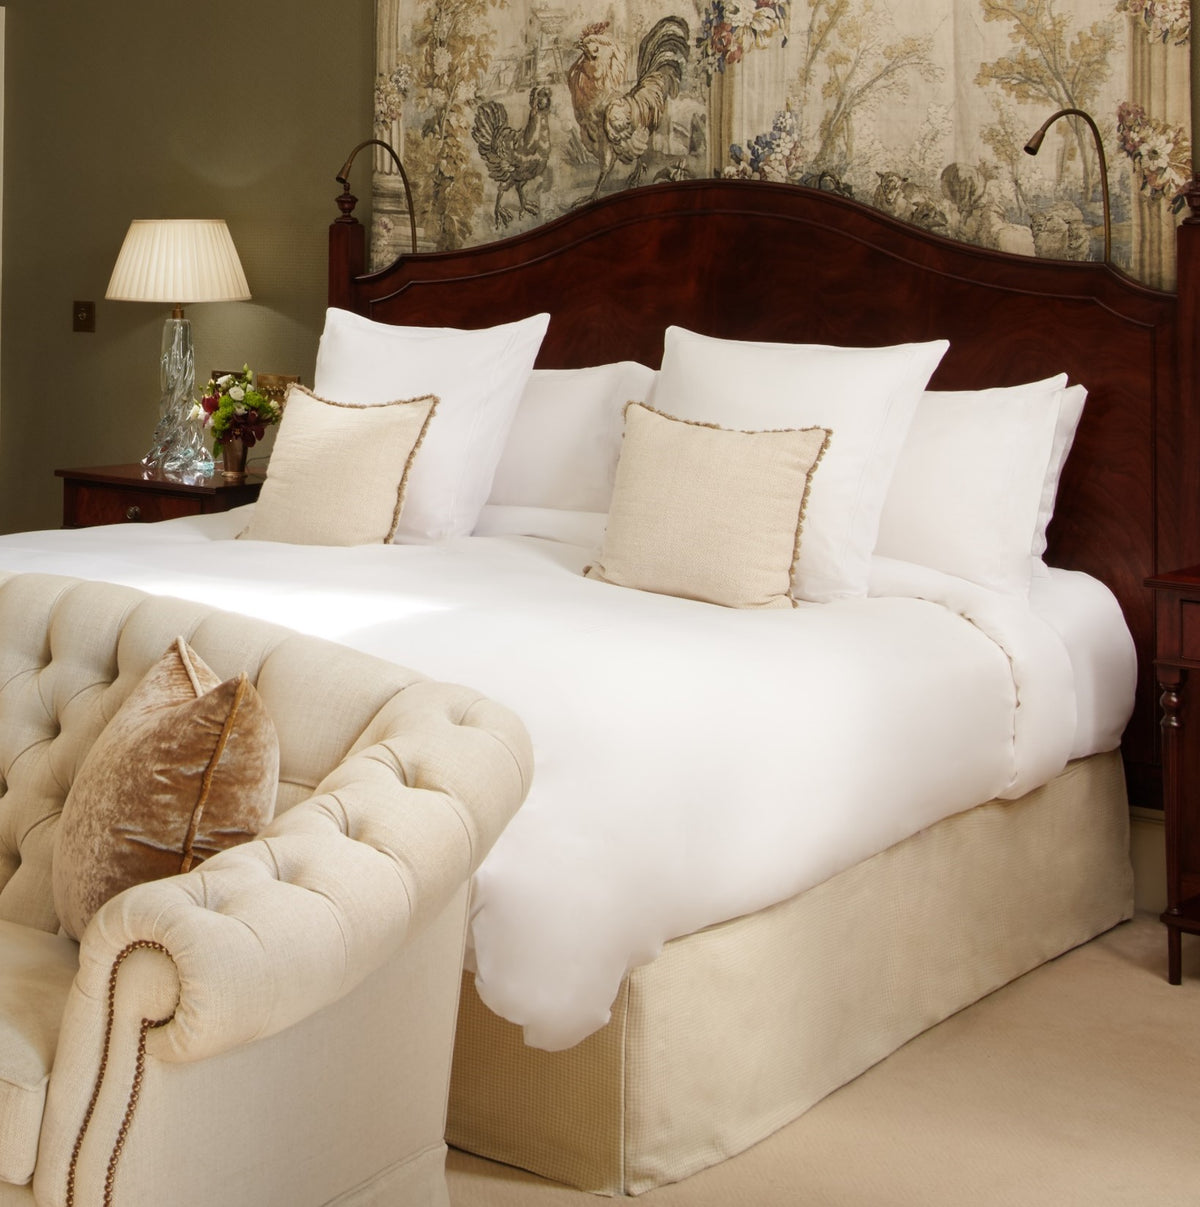 Adare Manor Luxury Bed Base and Mattress